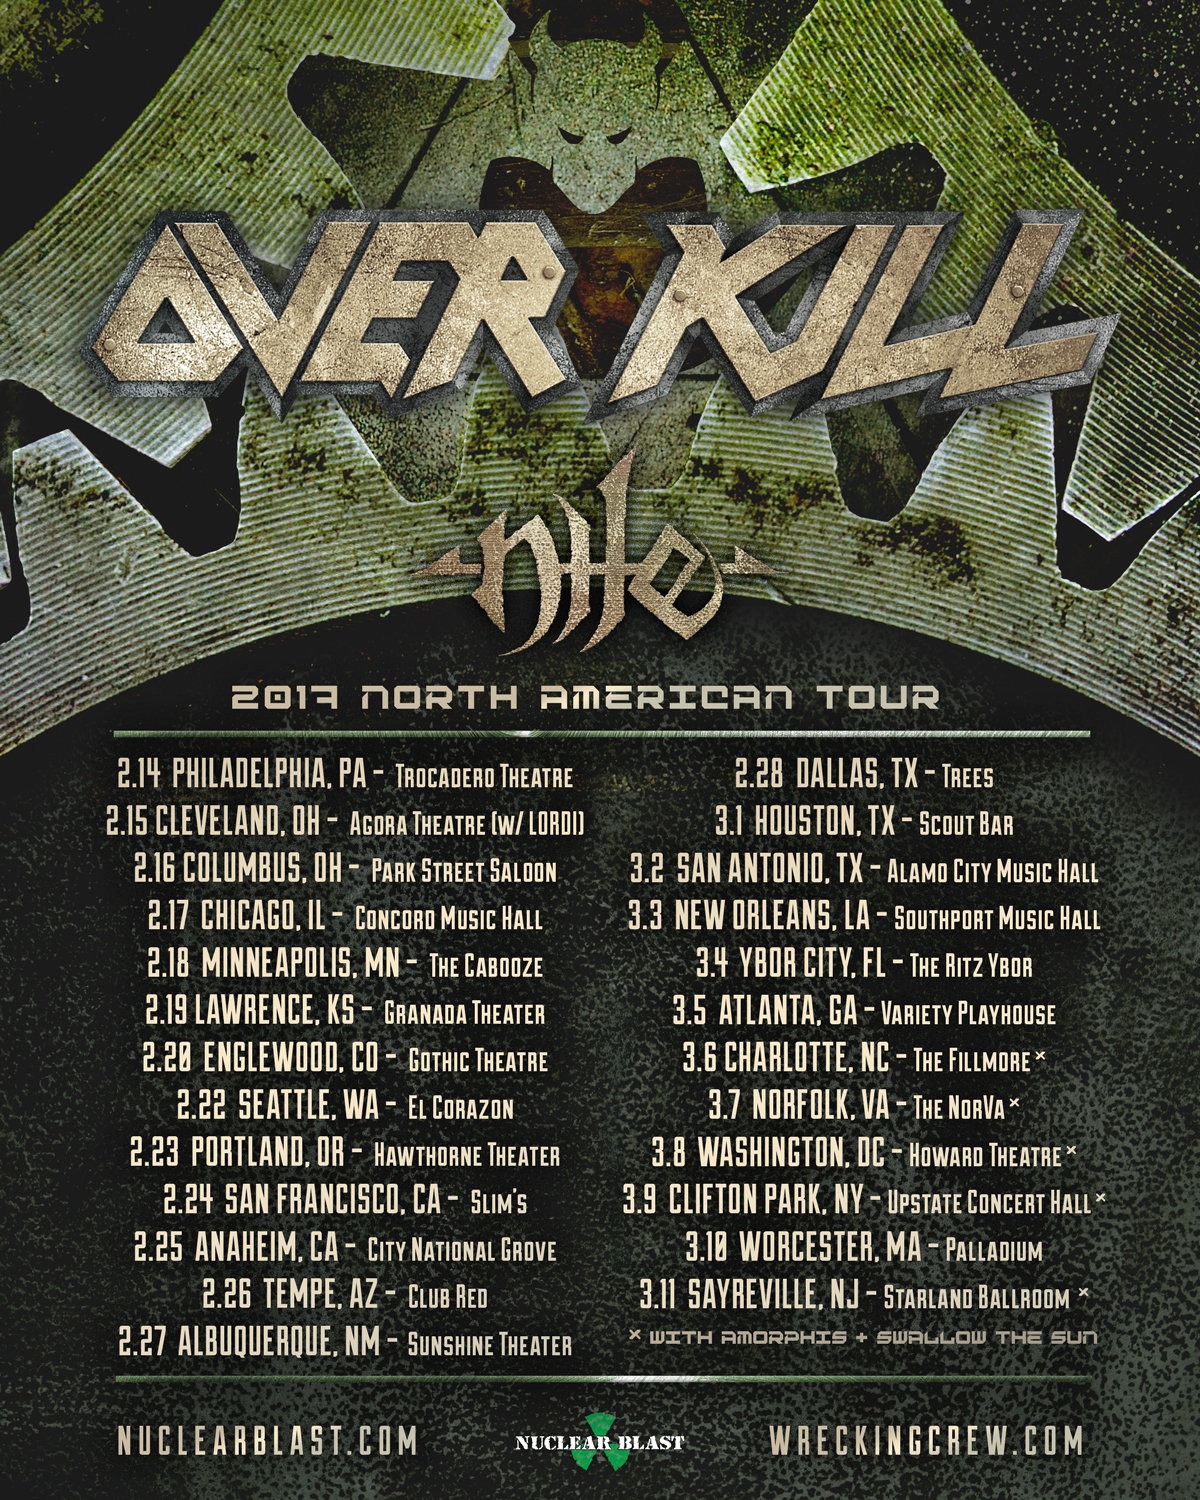 OVERKILL - First Track-By-Track Trailer For The Grinding Wheel Launched!